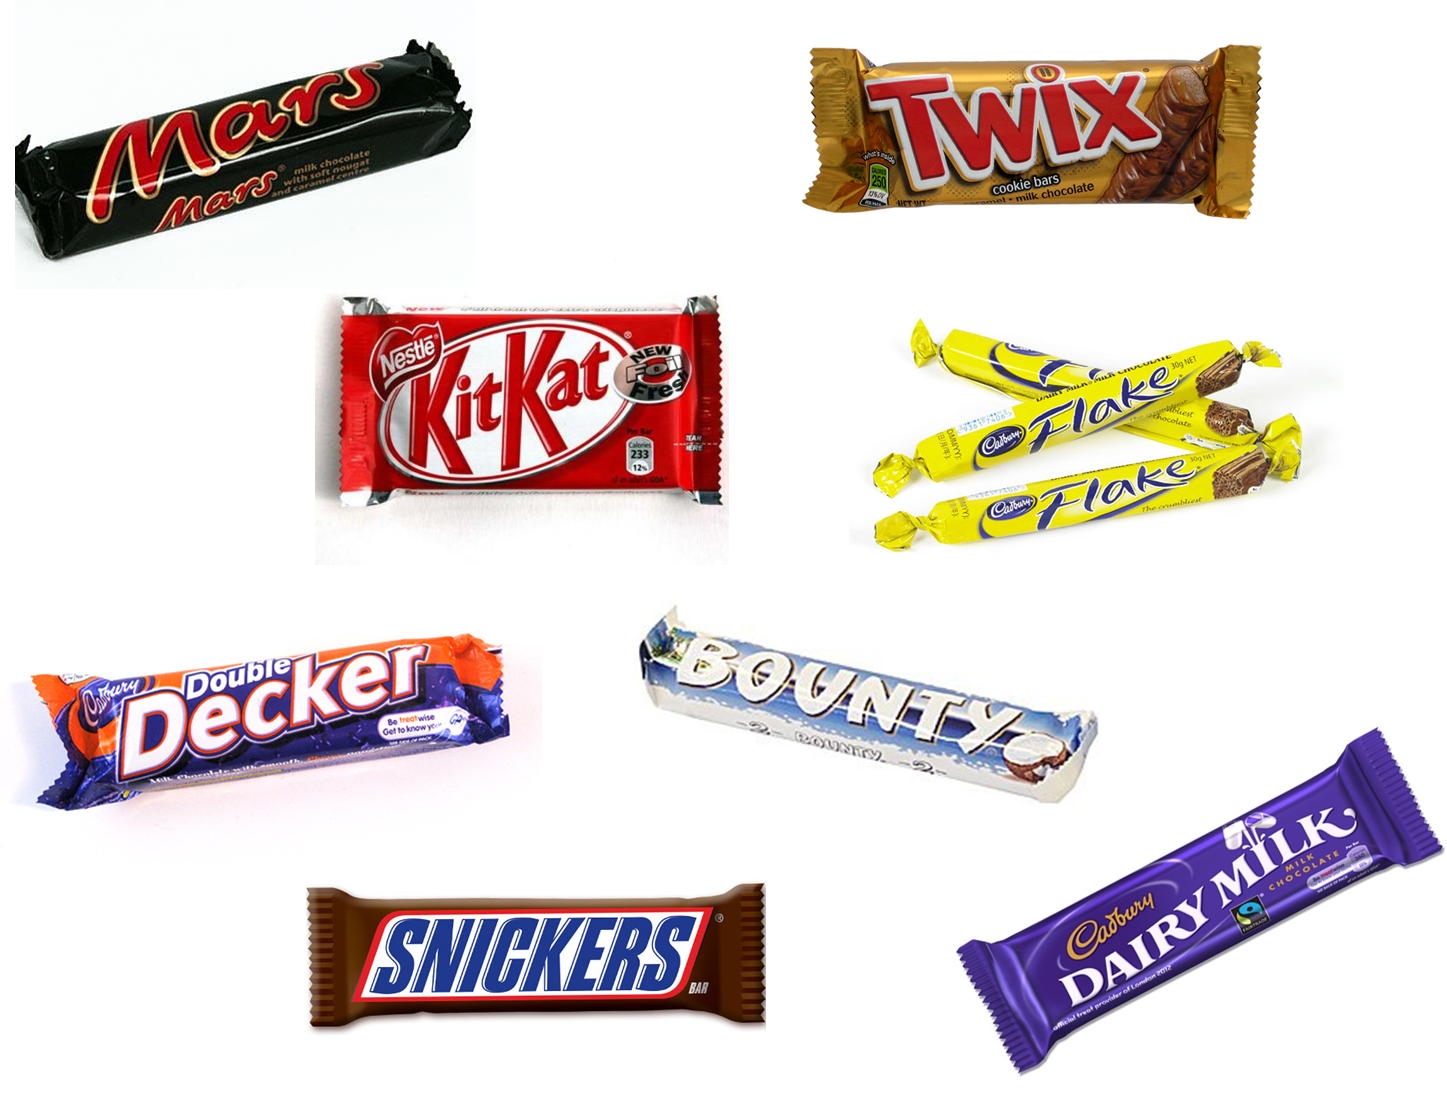 Which Product Goes With Which Graph - Nestle Kit Kat 4 Finger Pack Ref 12167199 [4 Packets] (1447x1099)